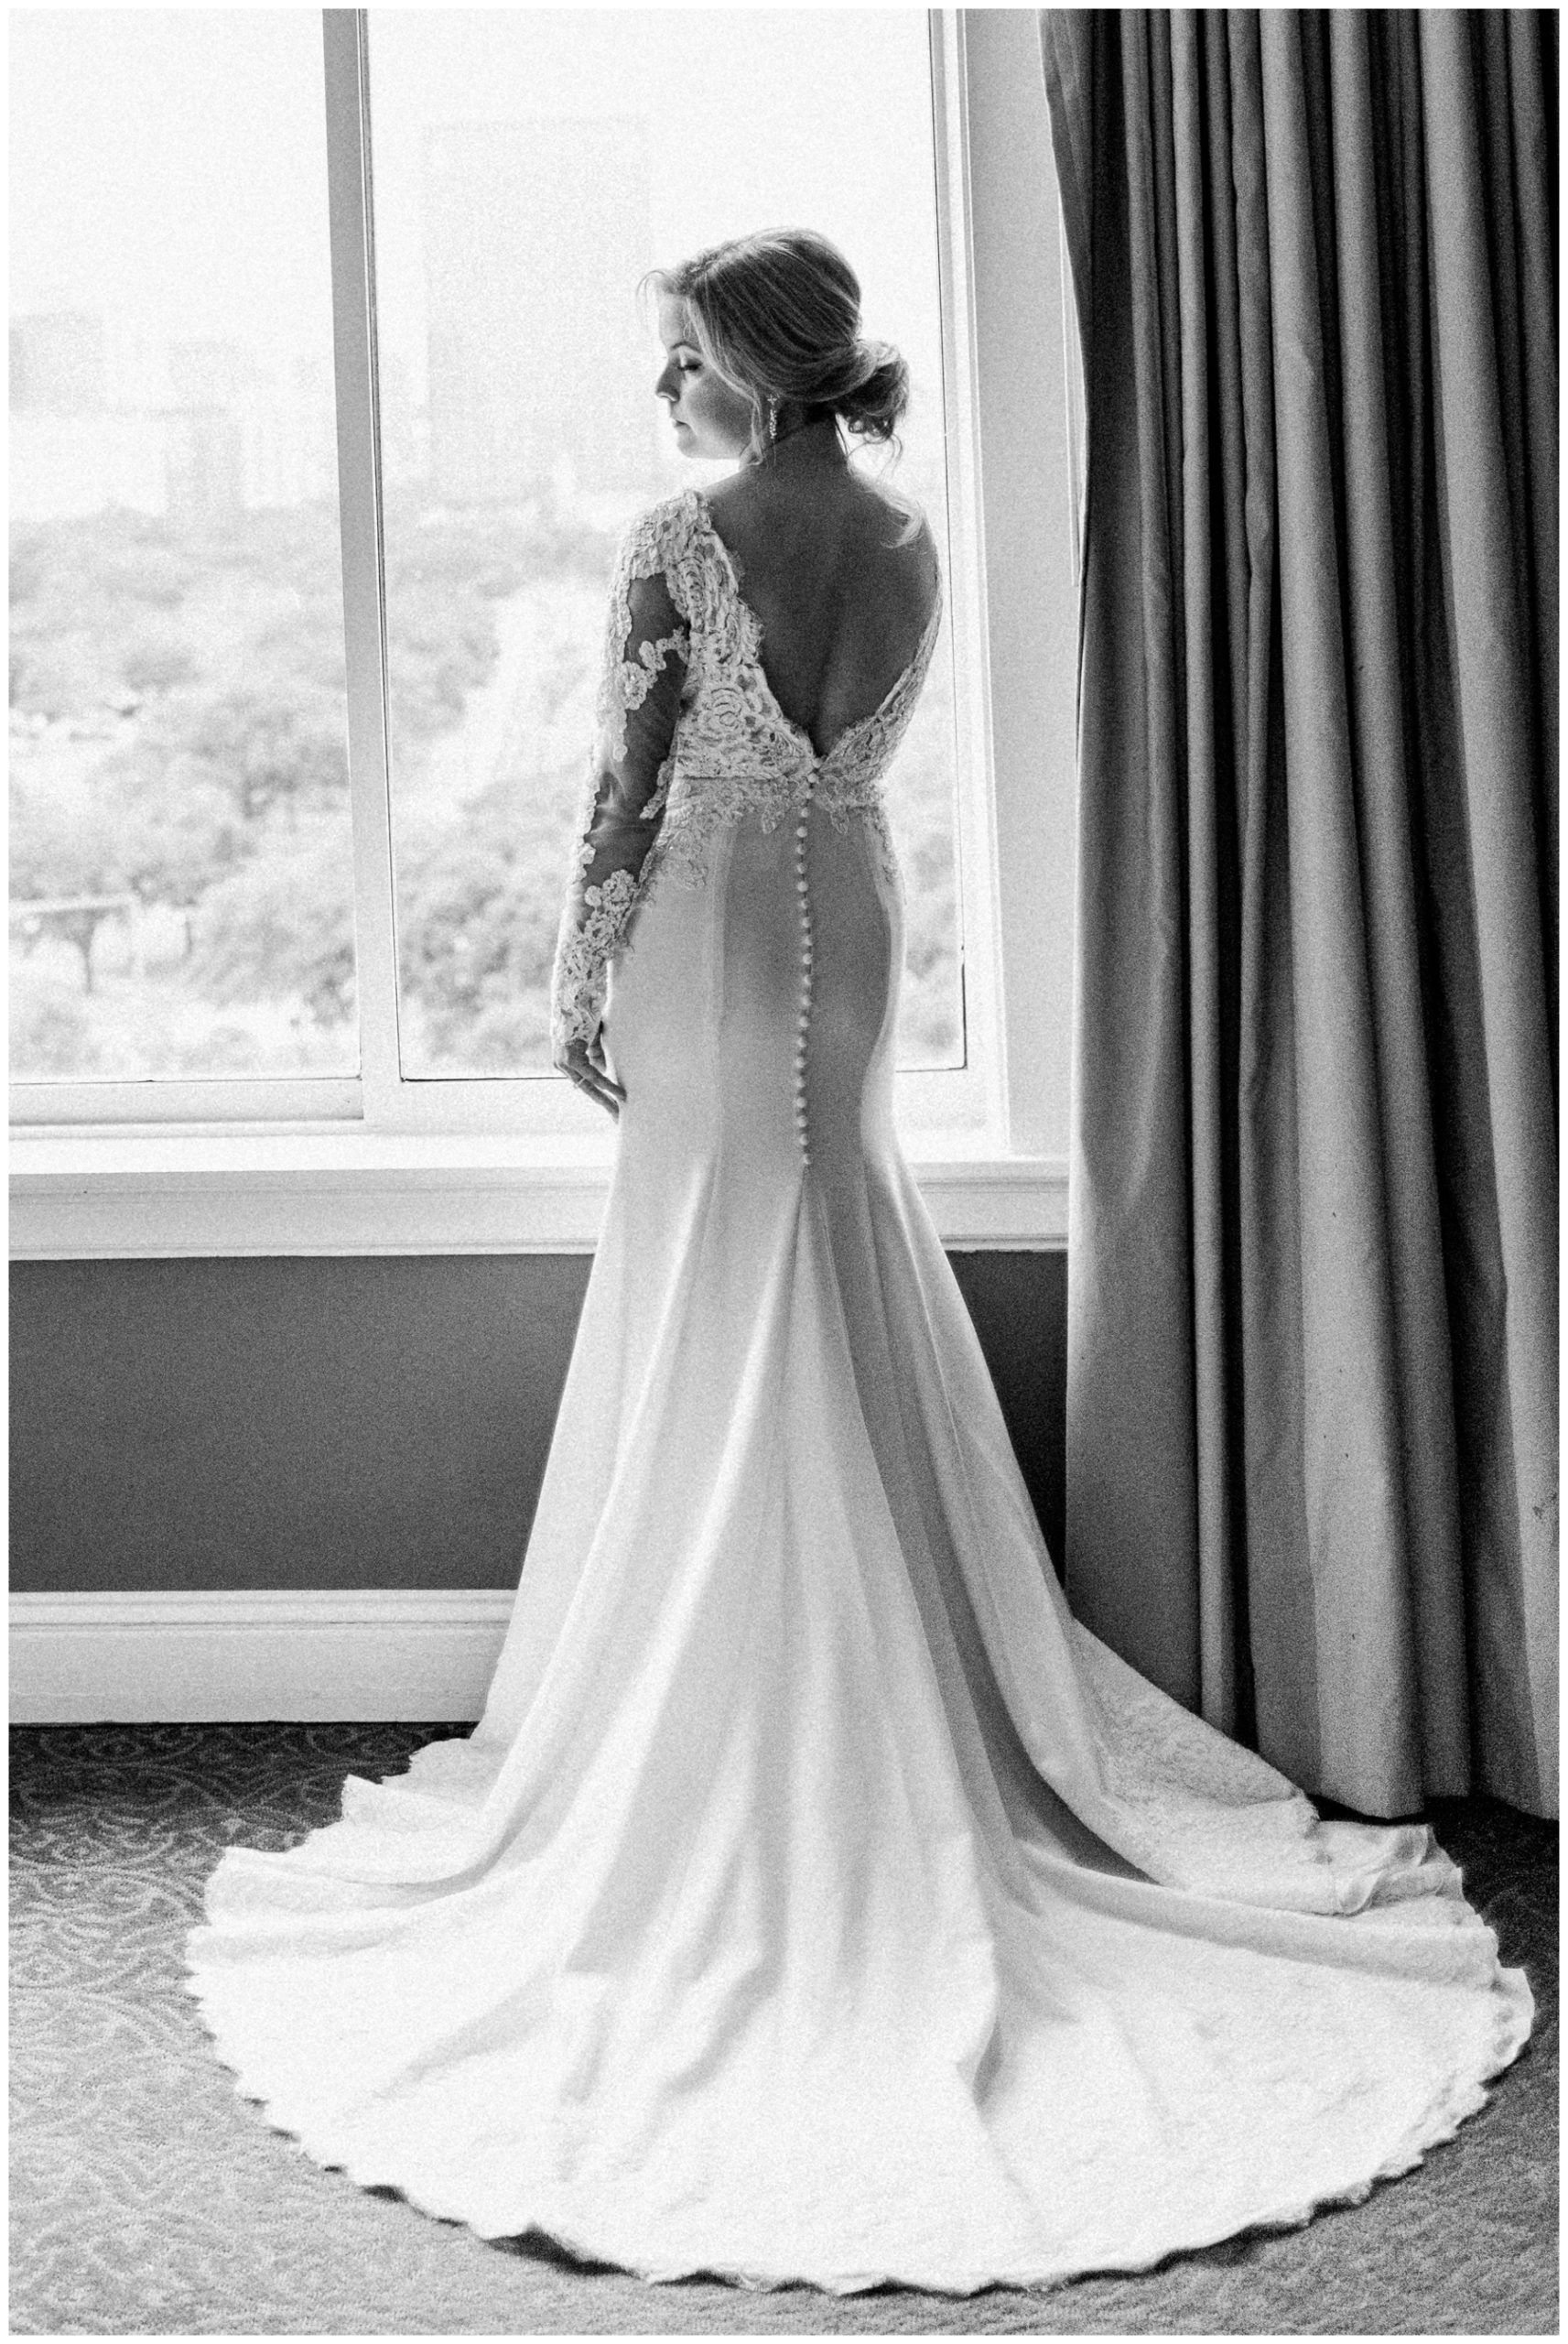 Bride in a lace wedding gown with a deep v neckline and mermaid skirt